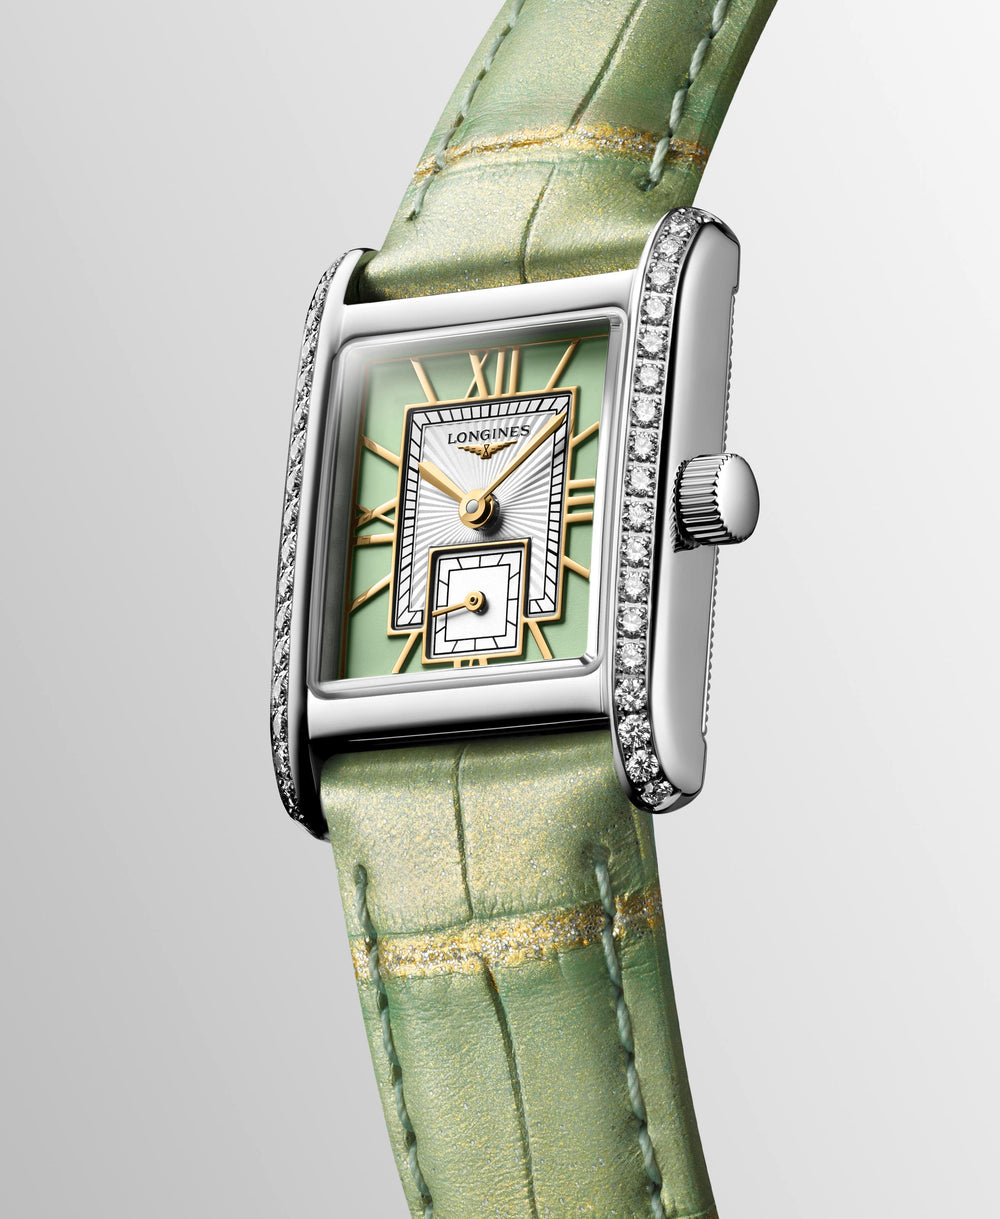 Longines Mini DolceVita L5.200.0.05.2 Watch - Elegant Timepieces at ORLY Jewellers